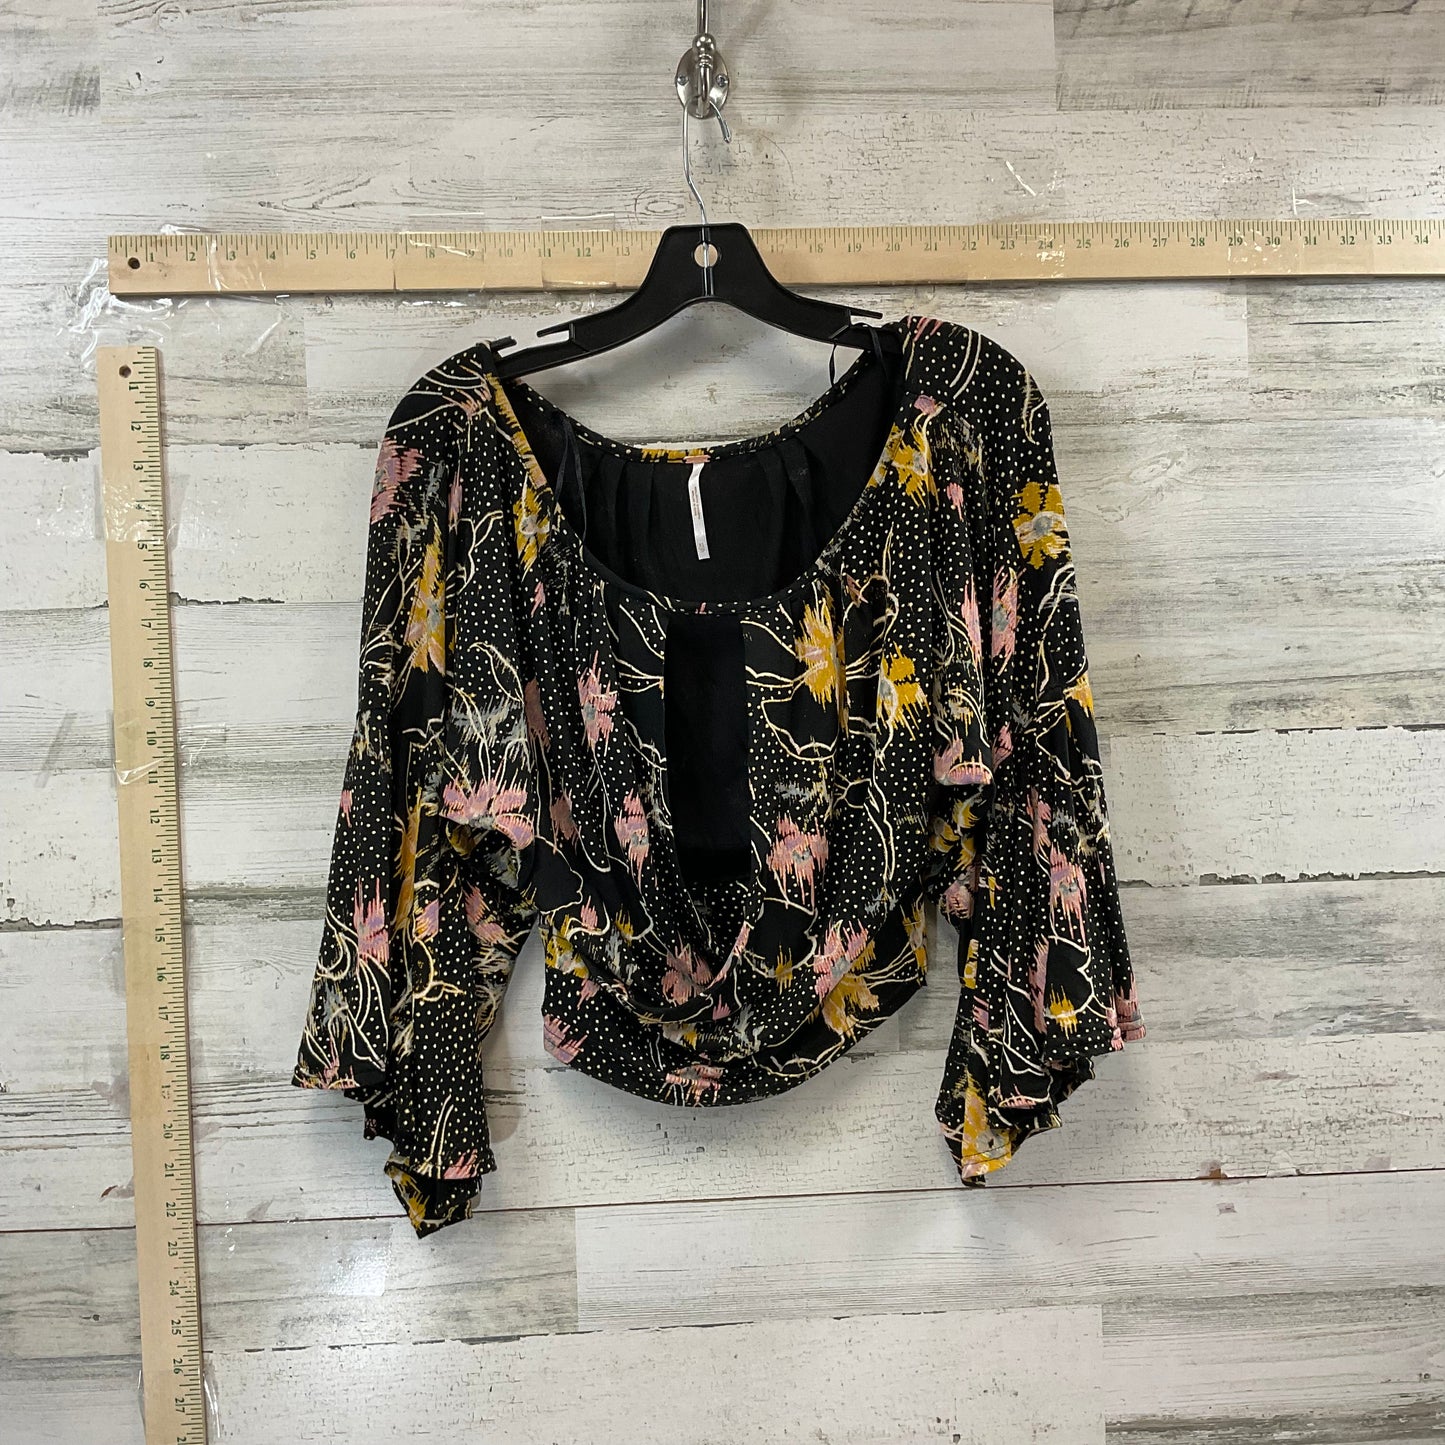 Black & Yellow Top Long Sleeve Free People, Size Xs